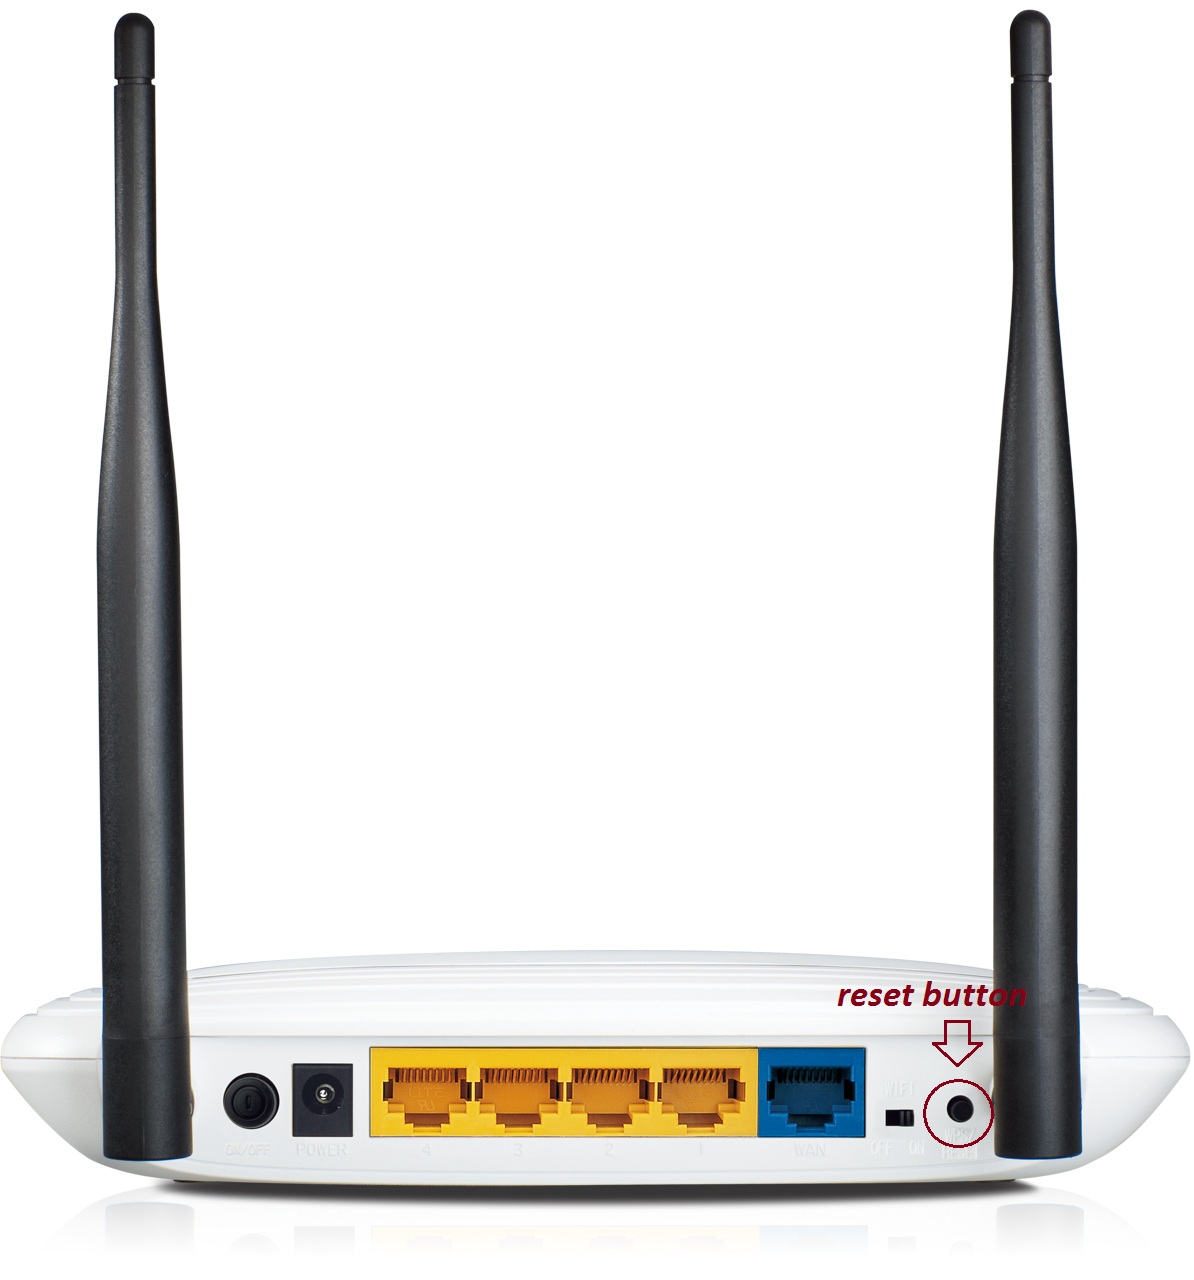 Hard reset TP-LINK TL-WR22N - How to Hard Reset Your Router